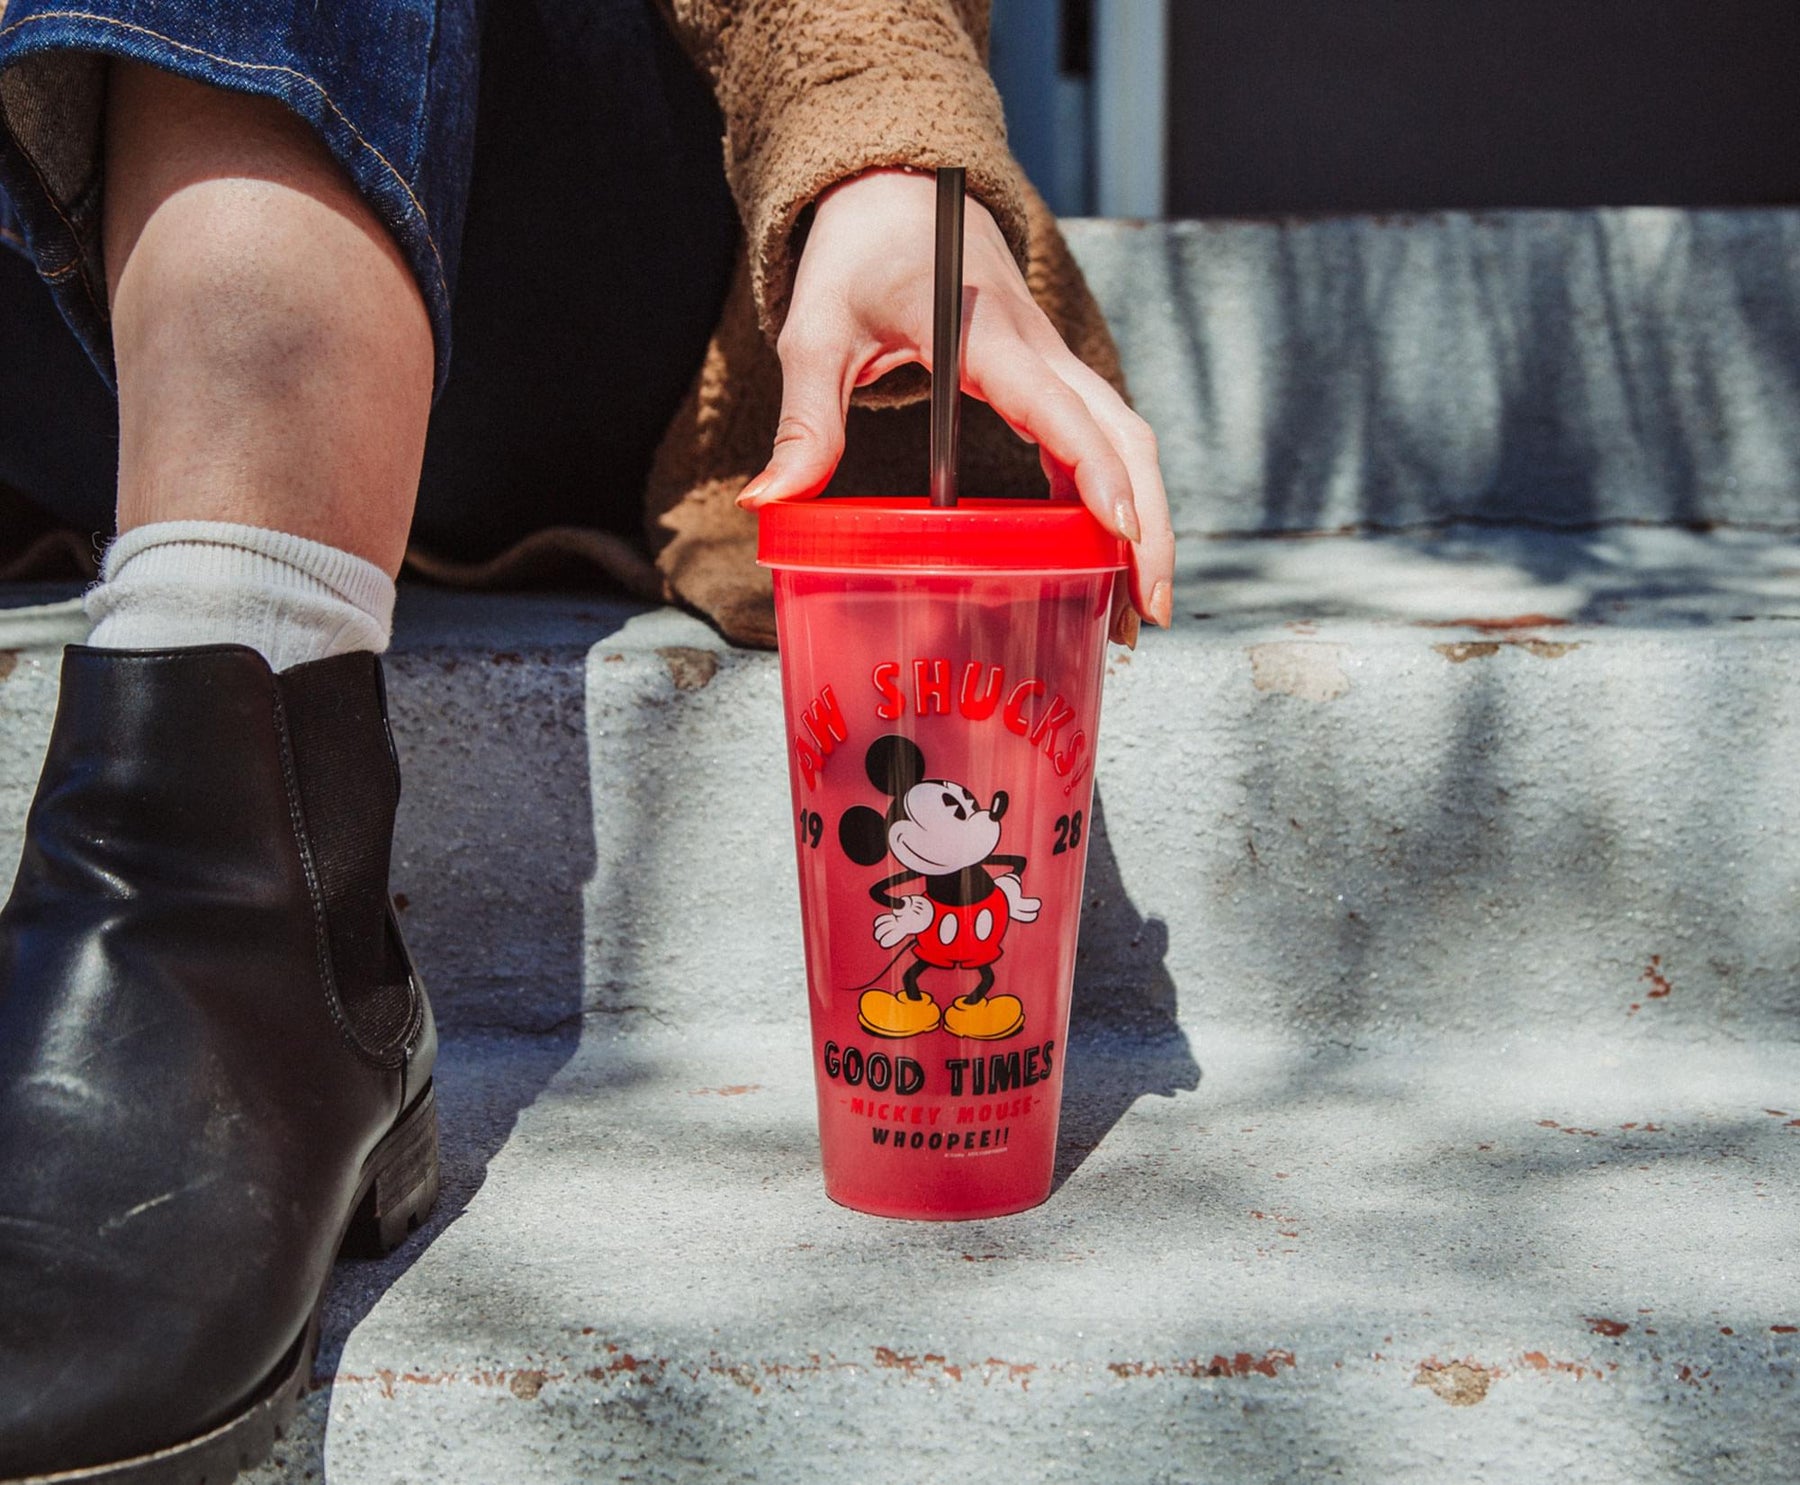 Disney Classic Mickey Mouse "Aw Shucks" Color-Changing Plastic Tumbler